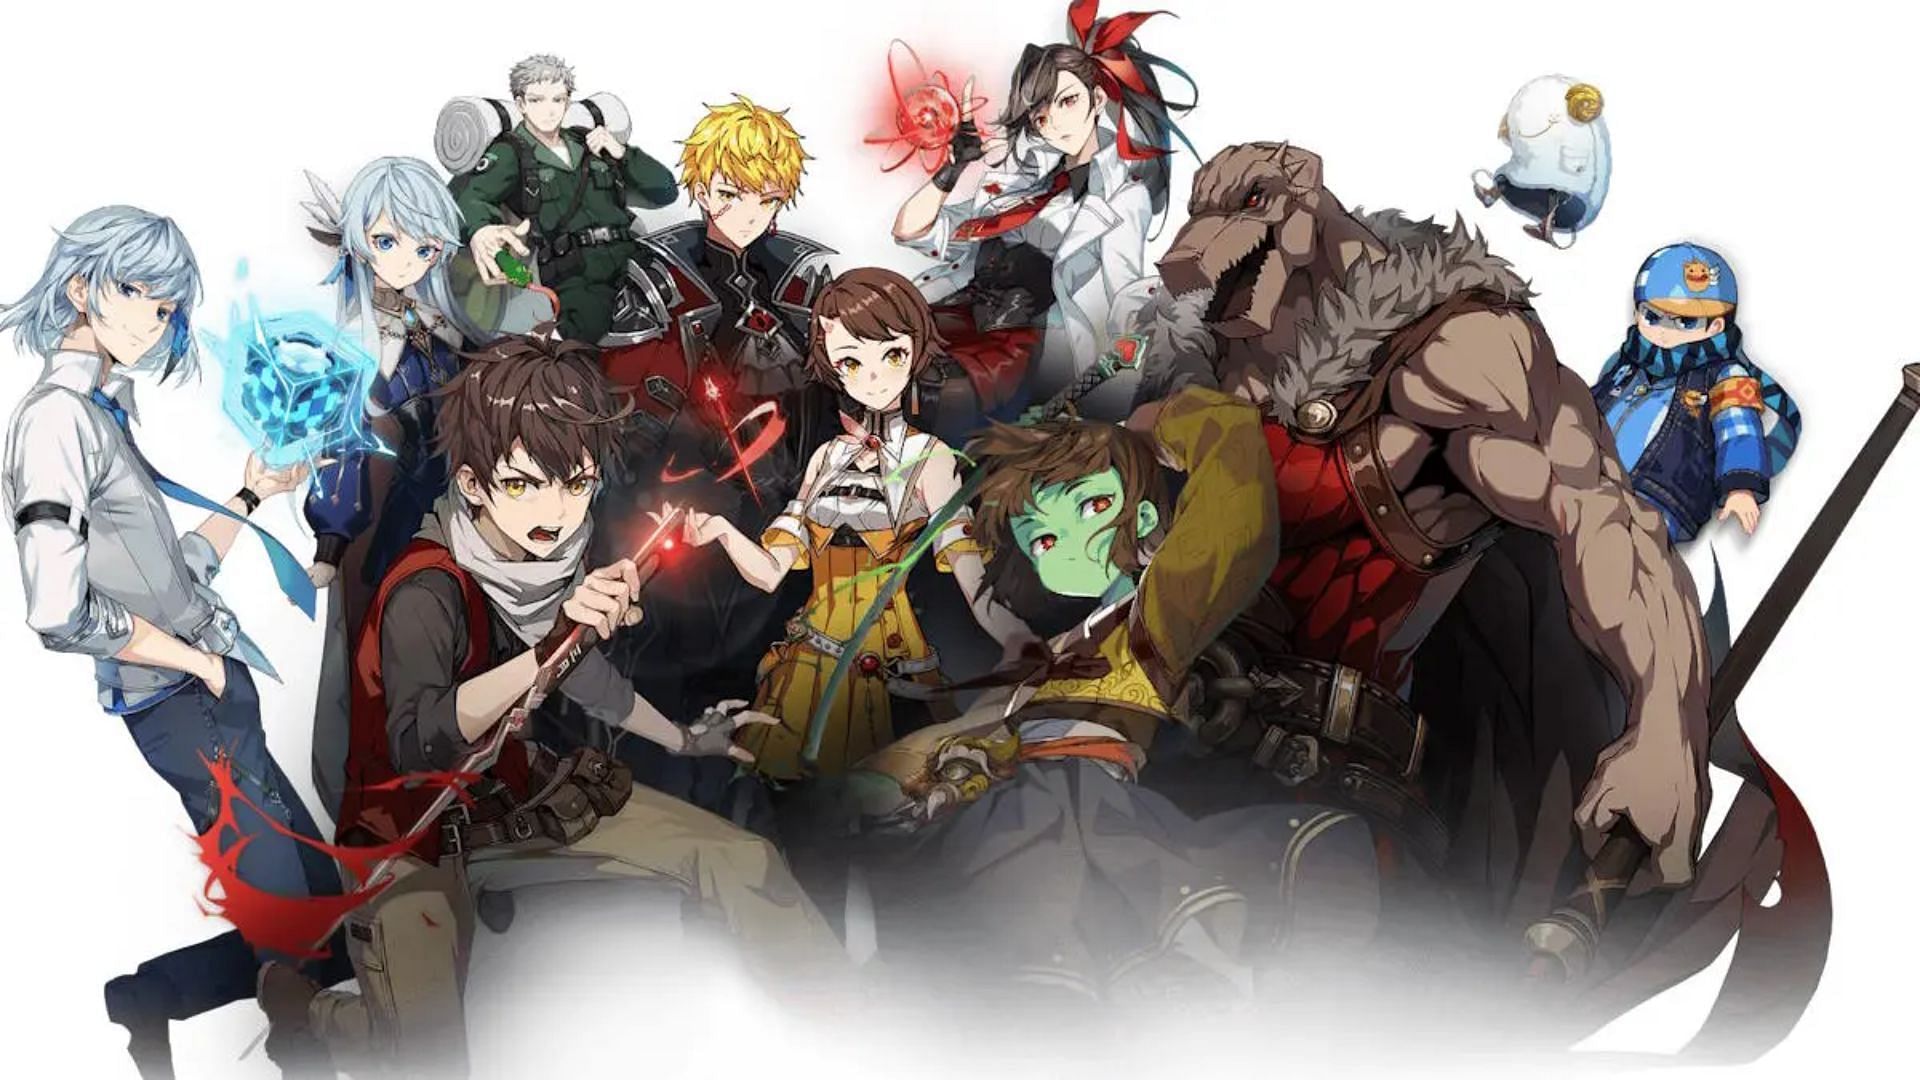 Tower of God: New World Tier List – All Characters Ranked – Gamezebo